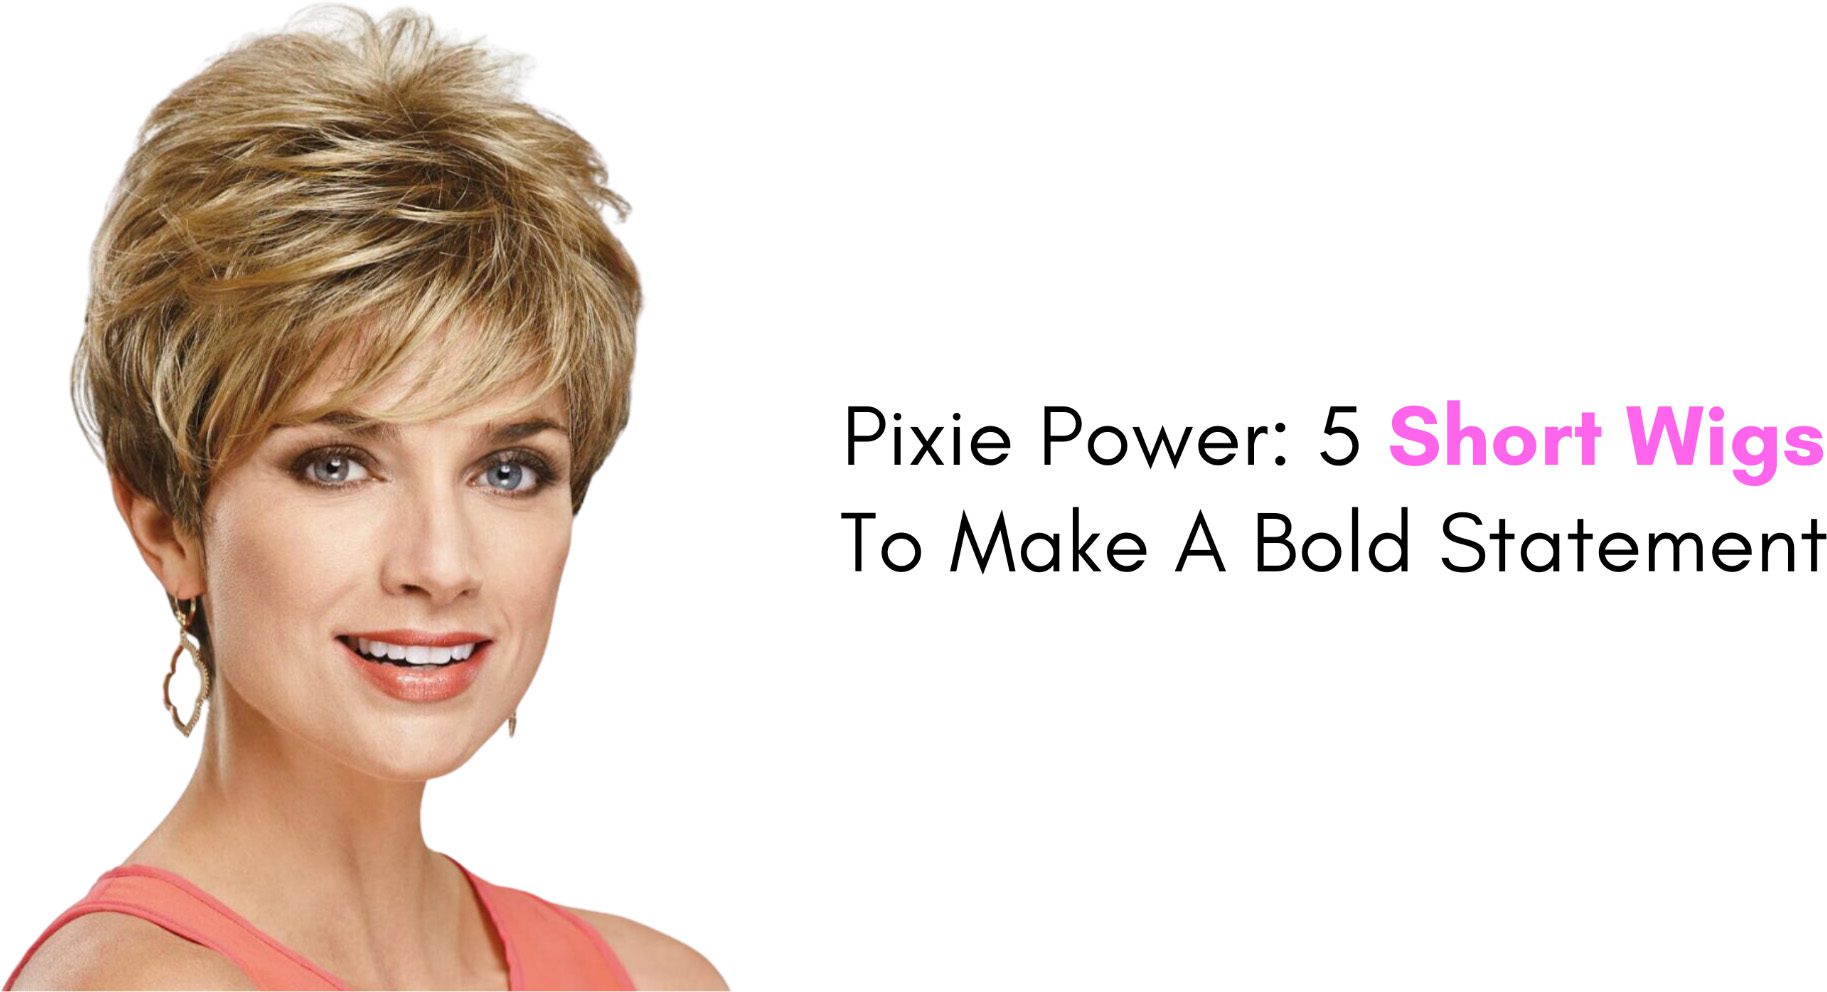 Pixie Power: 5 Short Wigs To Make A Bold Statement